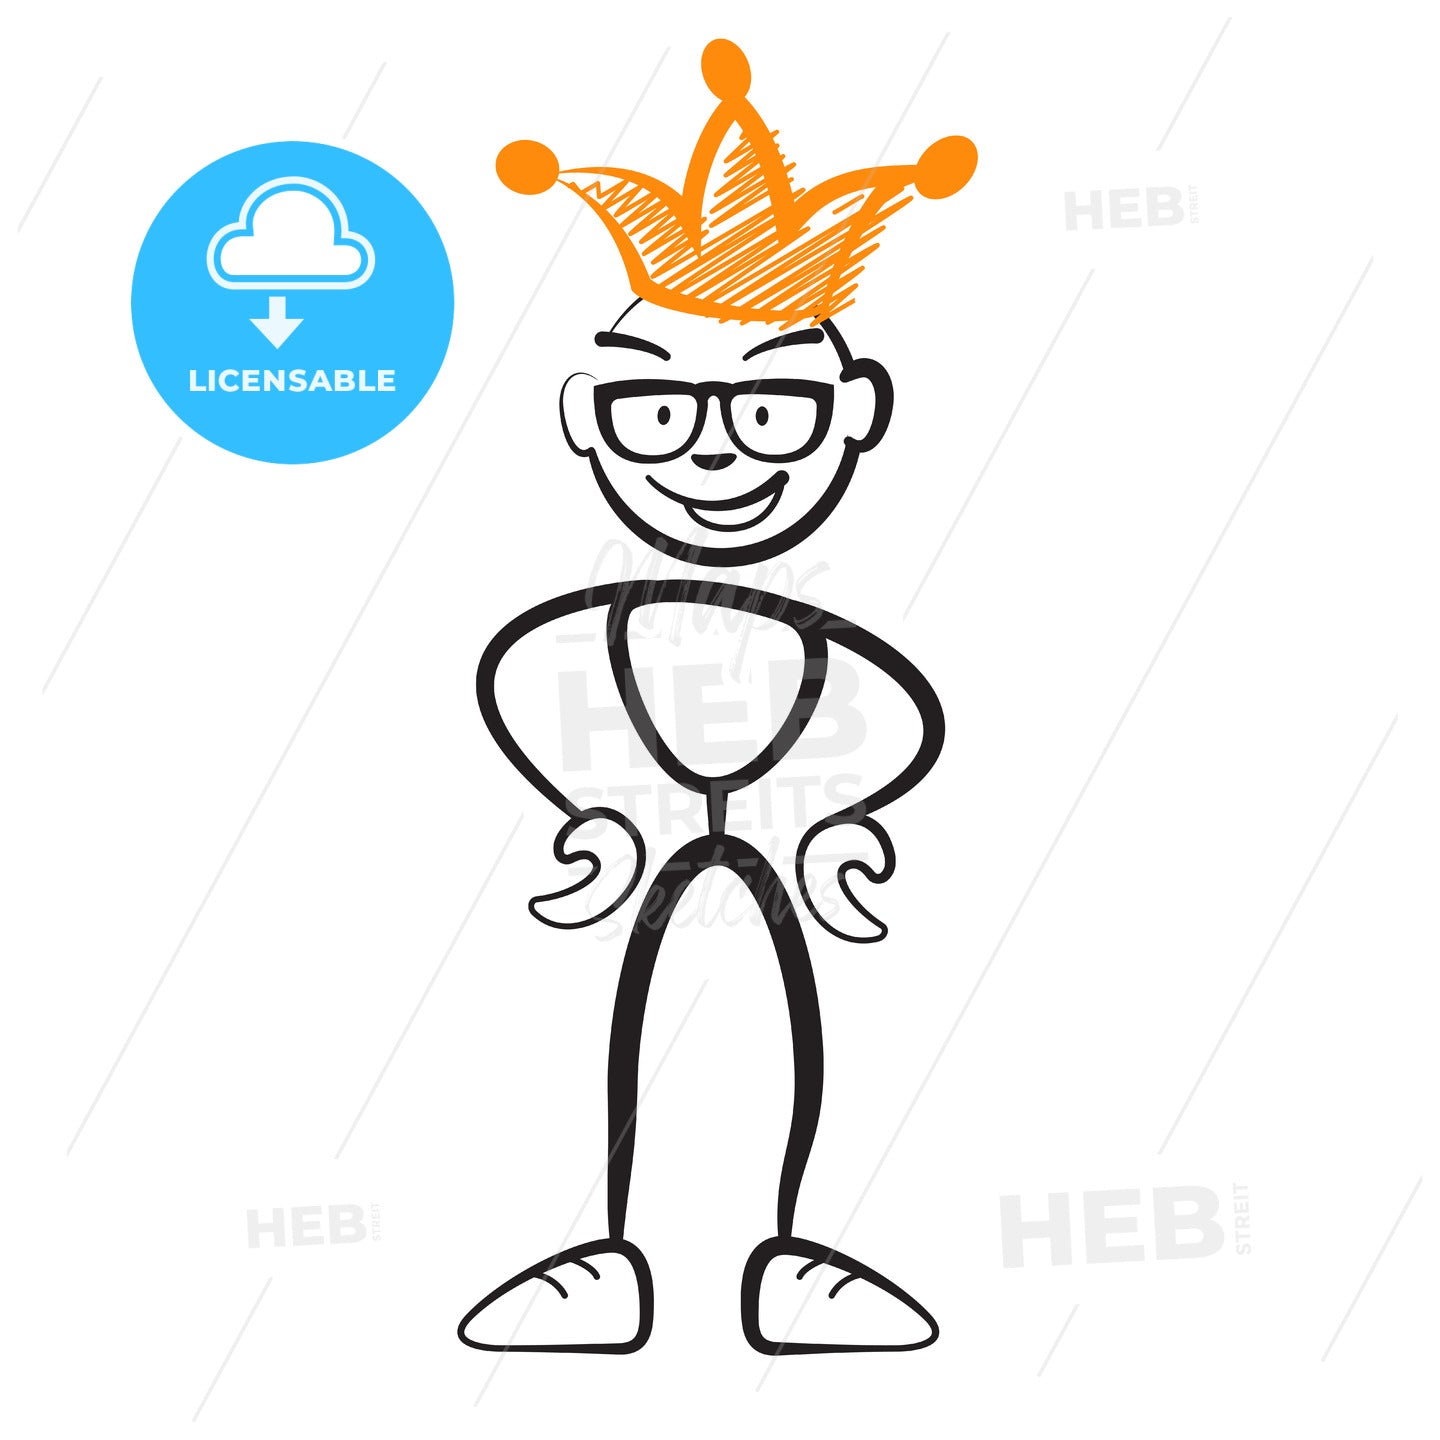 Stick figure king with glasses – instant download